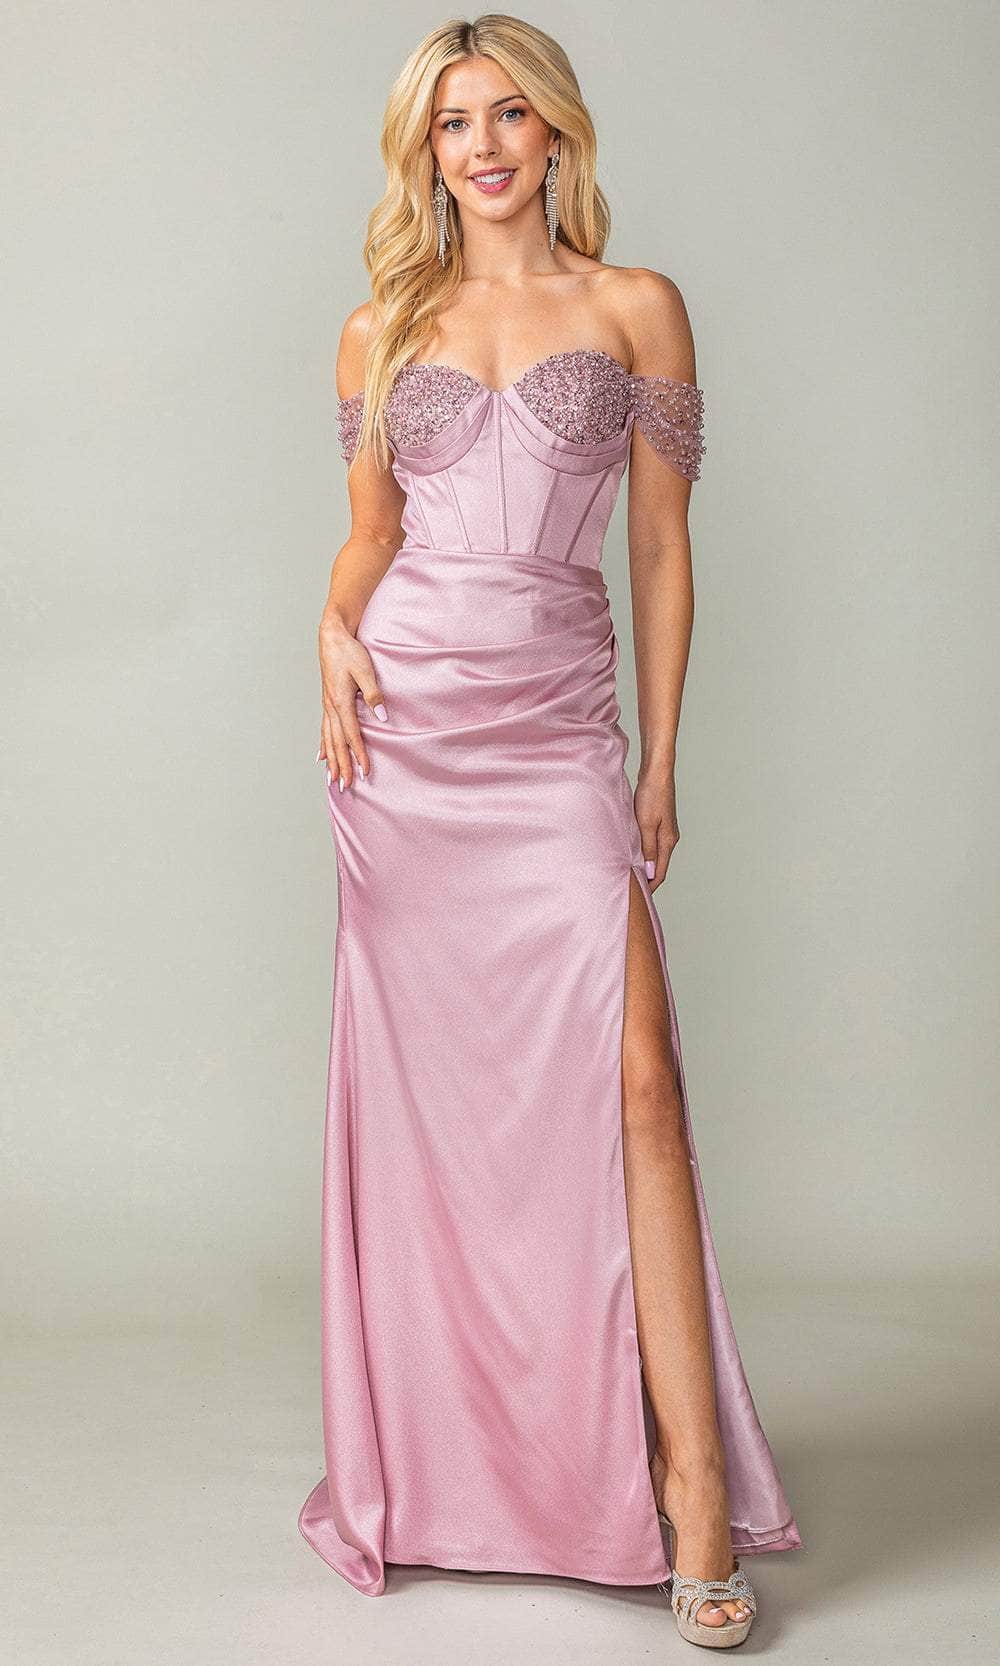 Dancing Queen 4401 - Jeweled Off Shoulder Prom Dress Prom Dresses 